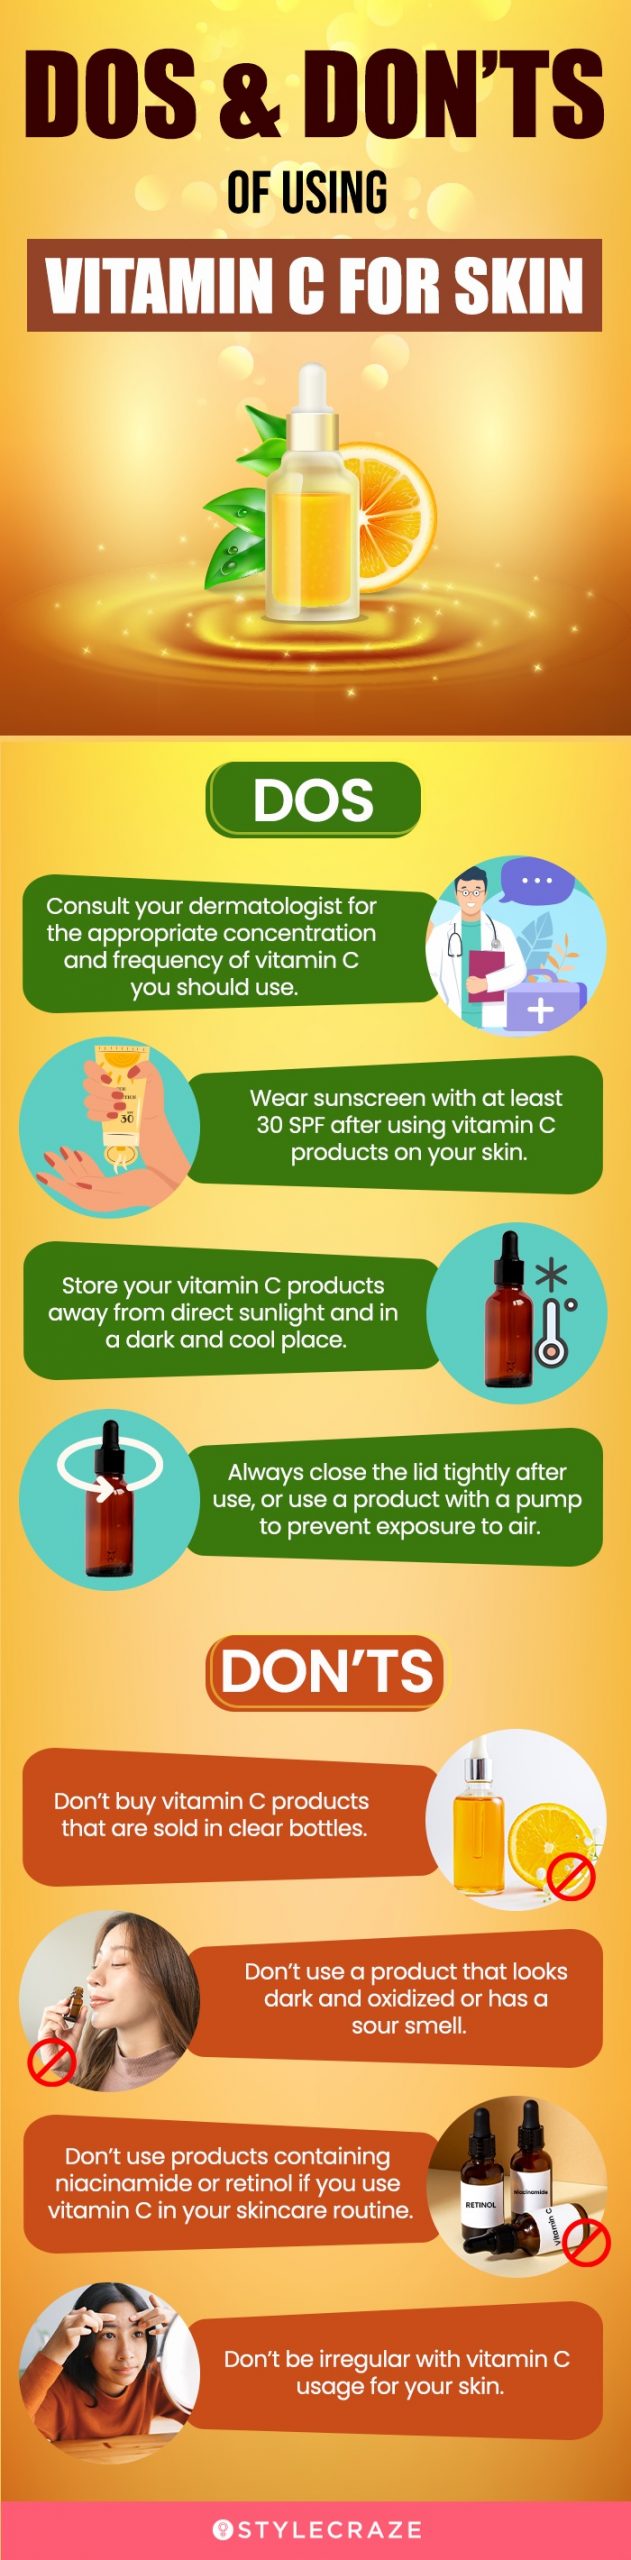 do’s and don'ts of using vitamin c for skin (infographic)